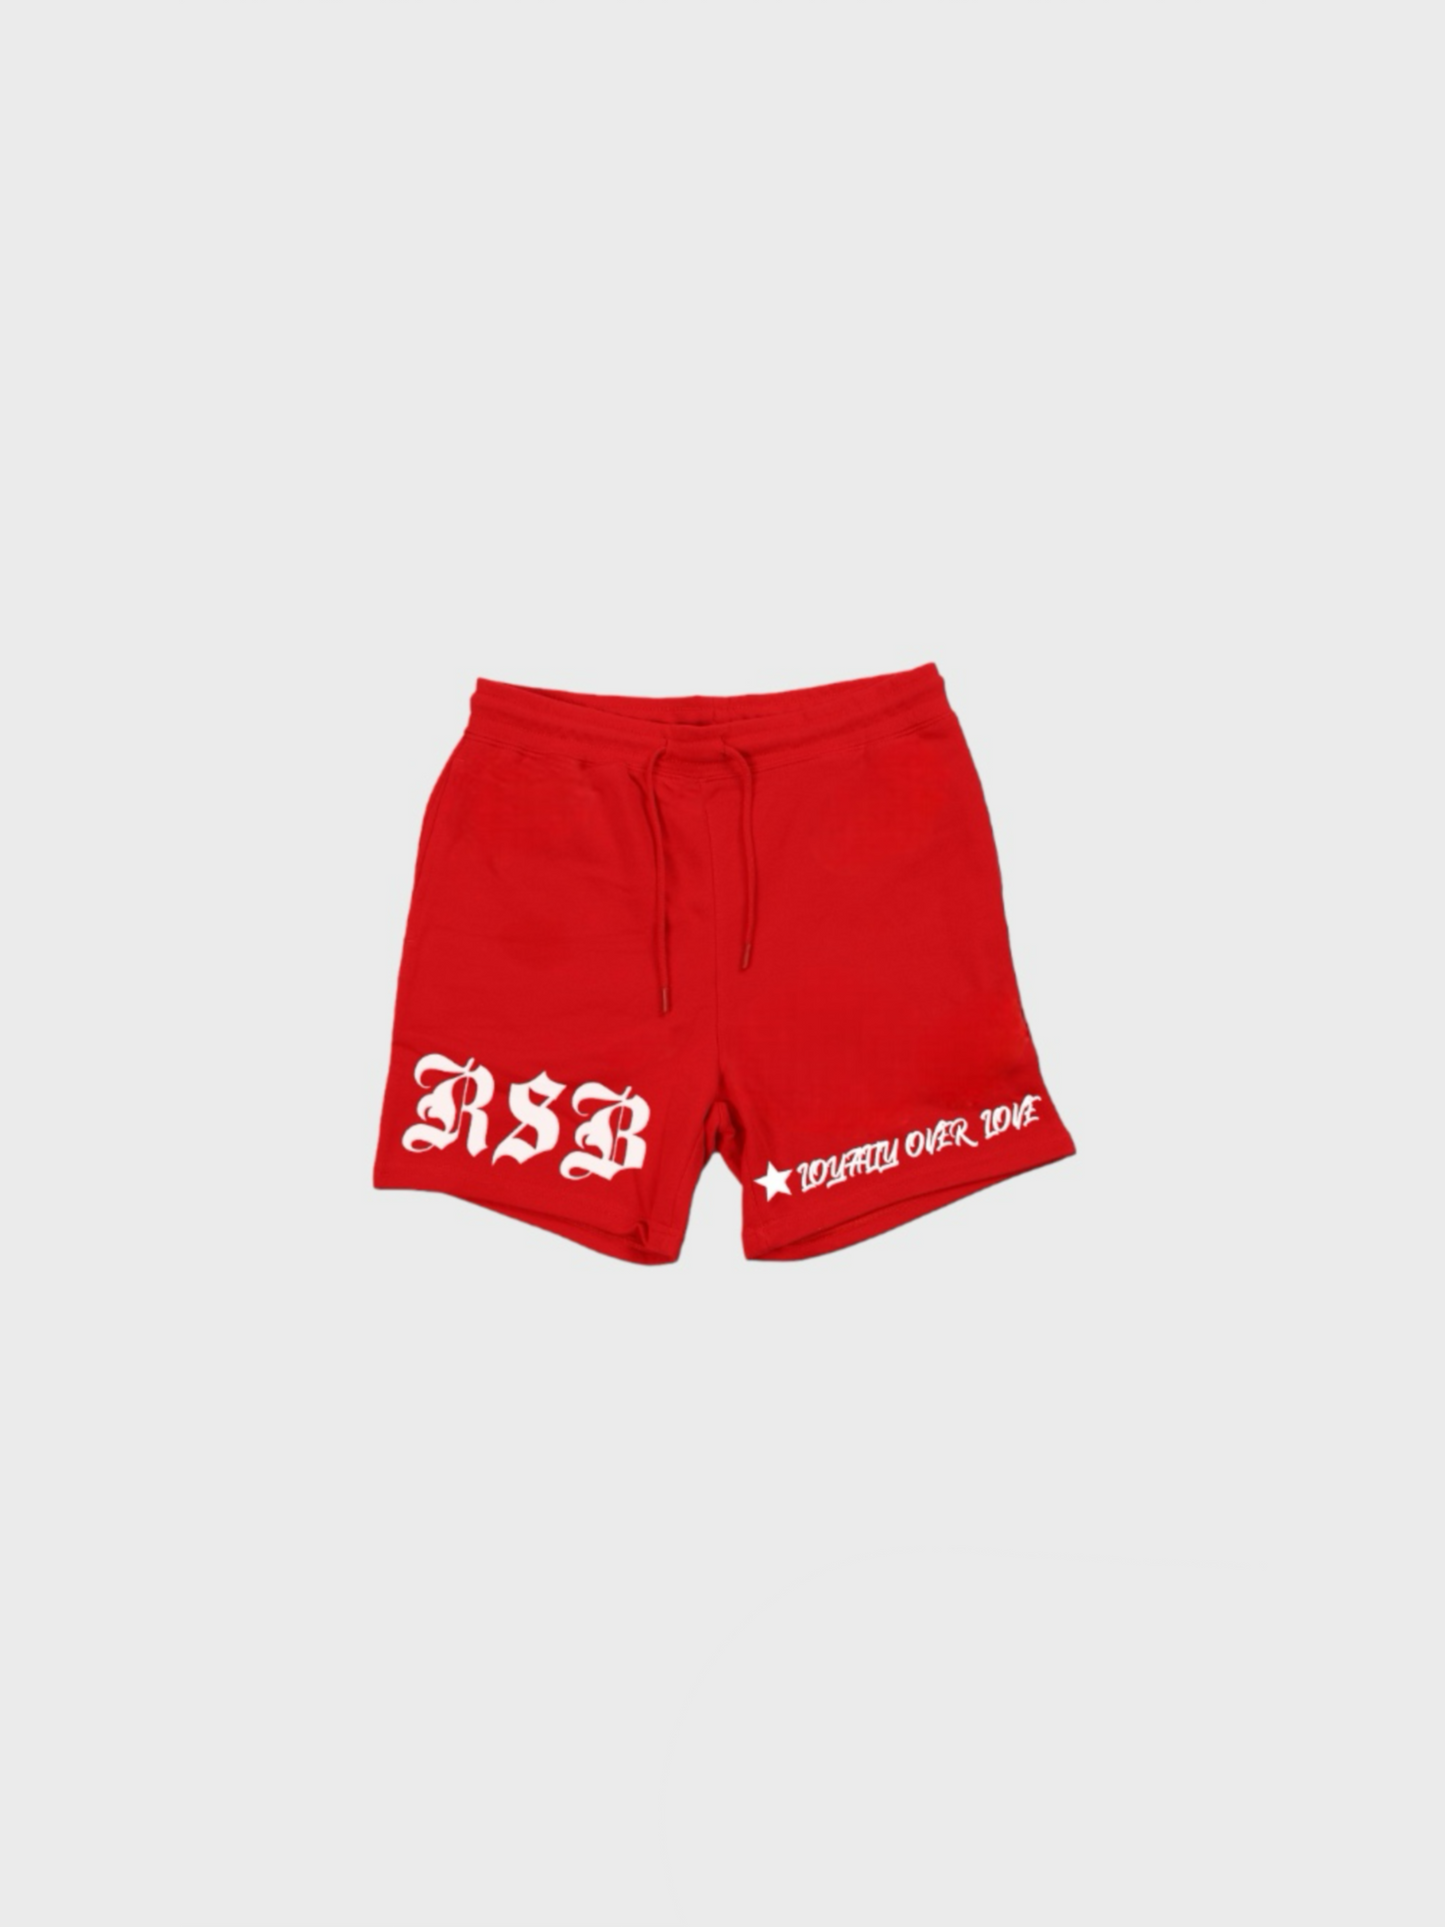 LOYALTY OVER LOVE SHORTS- RED/WHITE